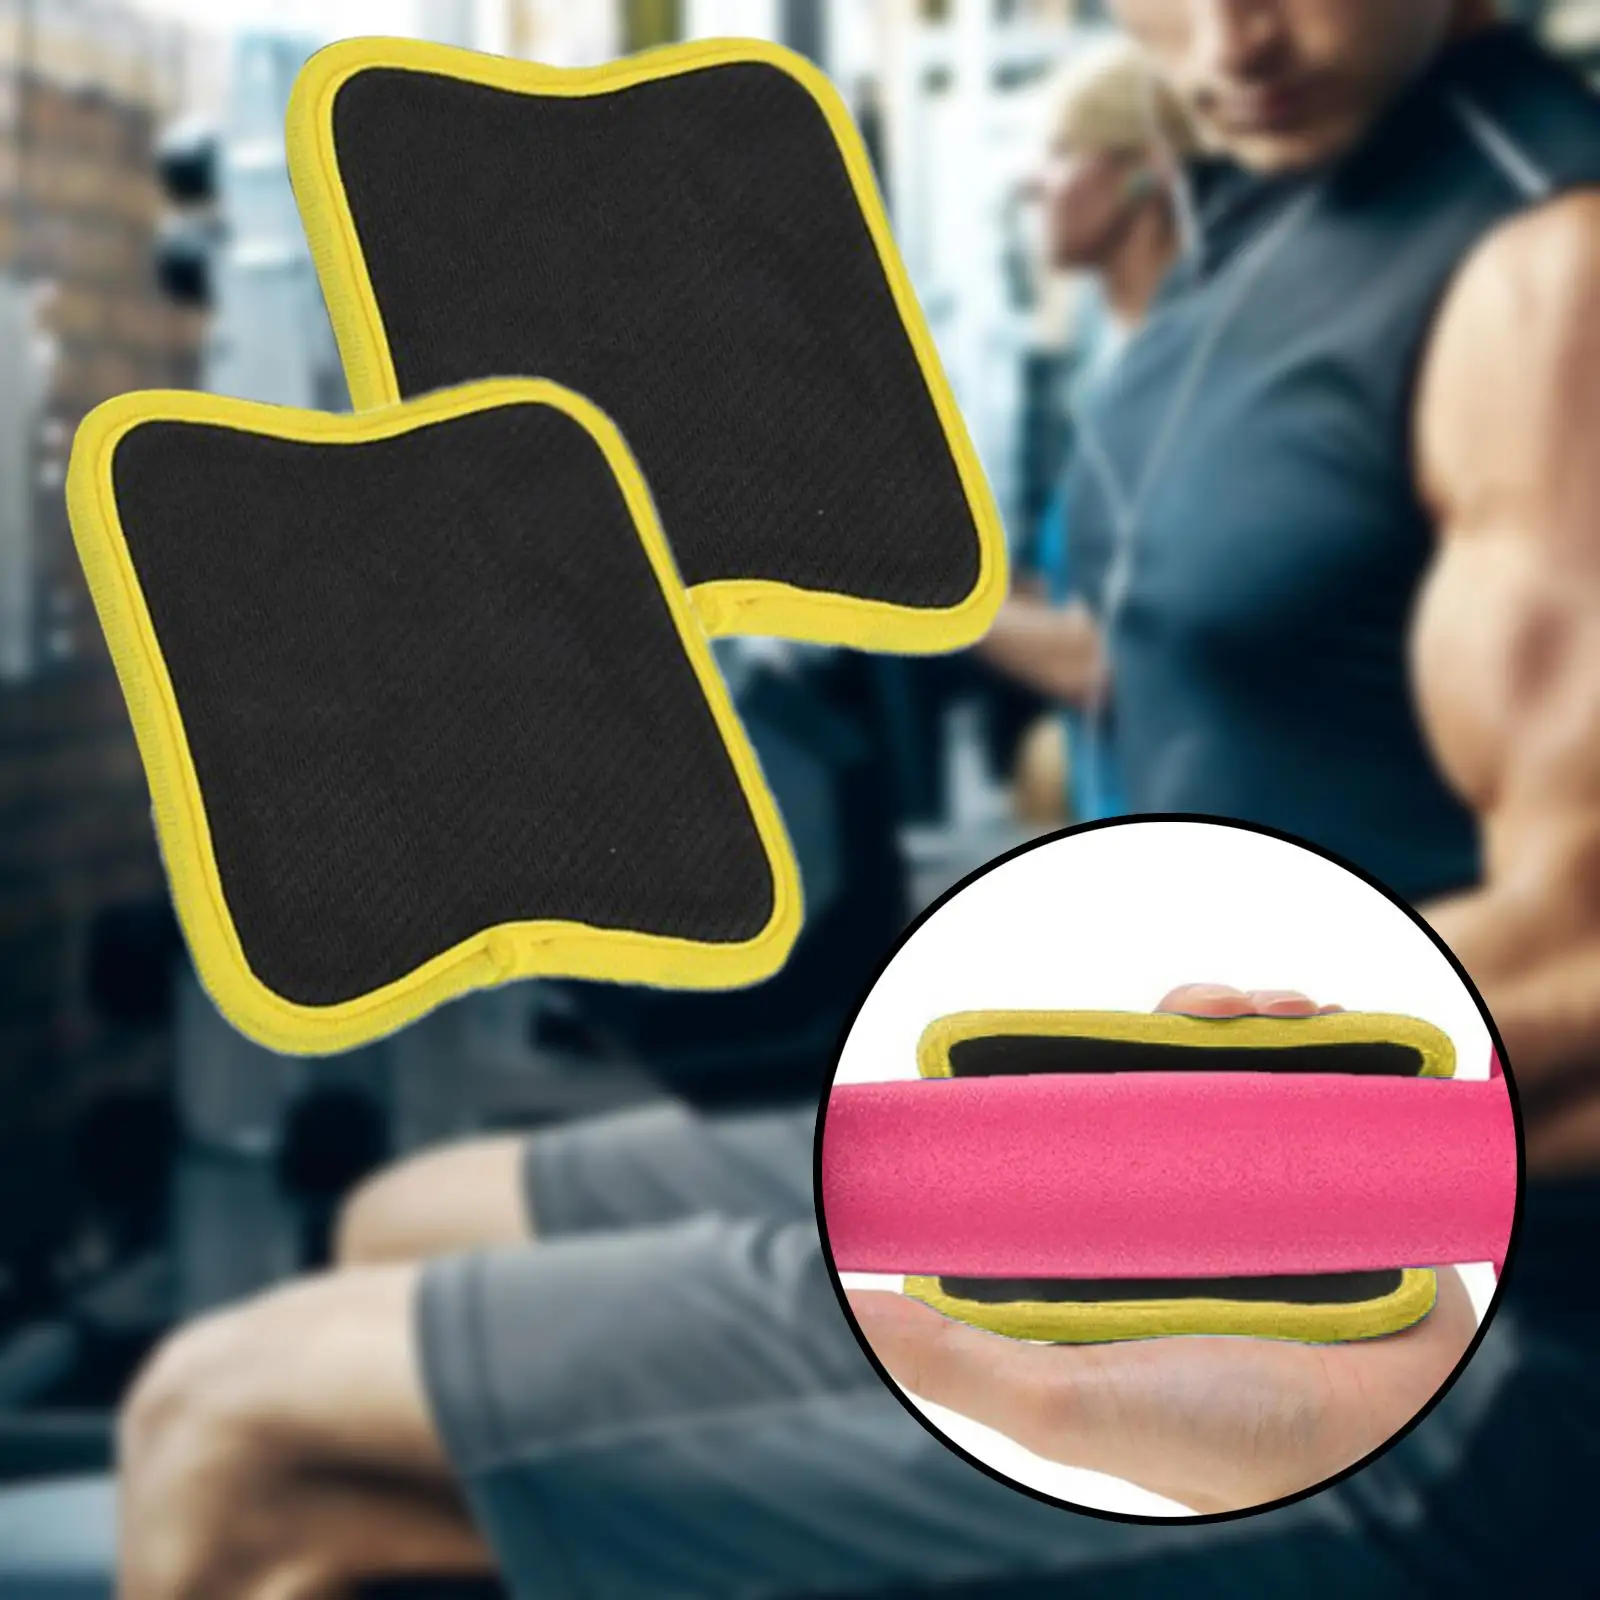 2 Pieces Gym Grip Pads No Sweaty Hands Protector Workout Pads Pull up Comfort for Dumbbell Fitness Sports Training Women Men